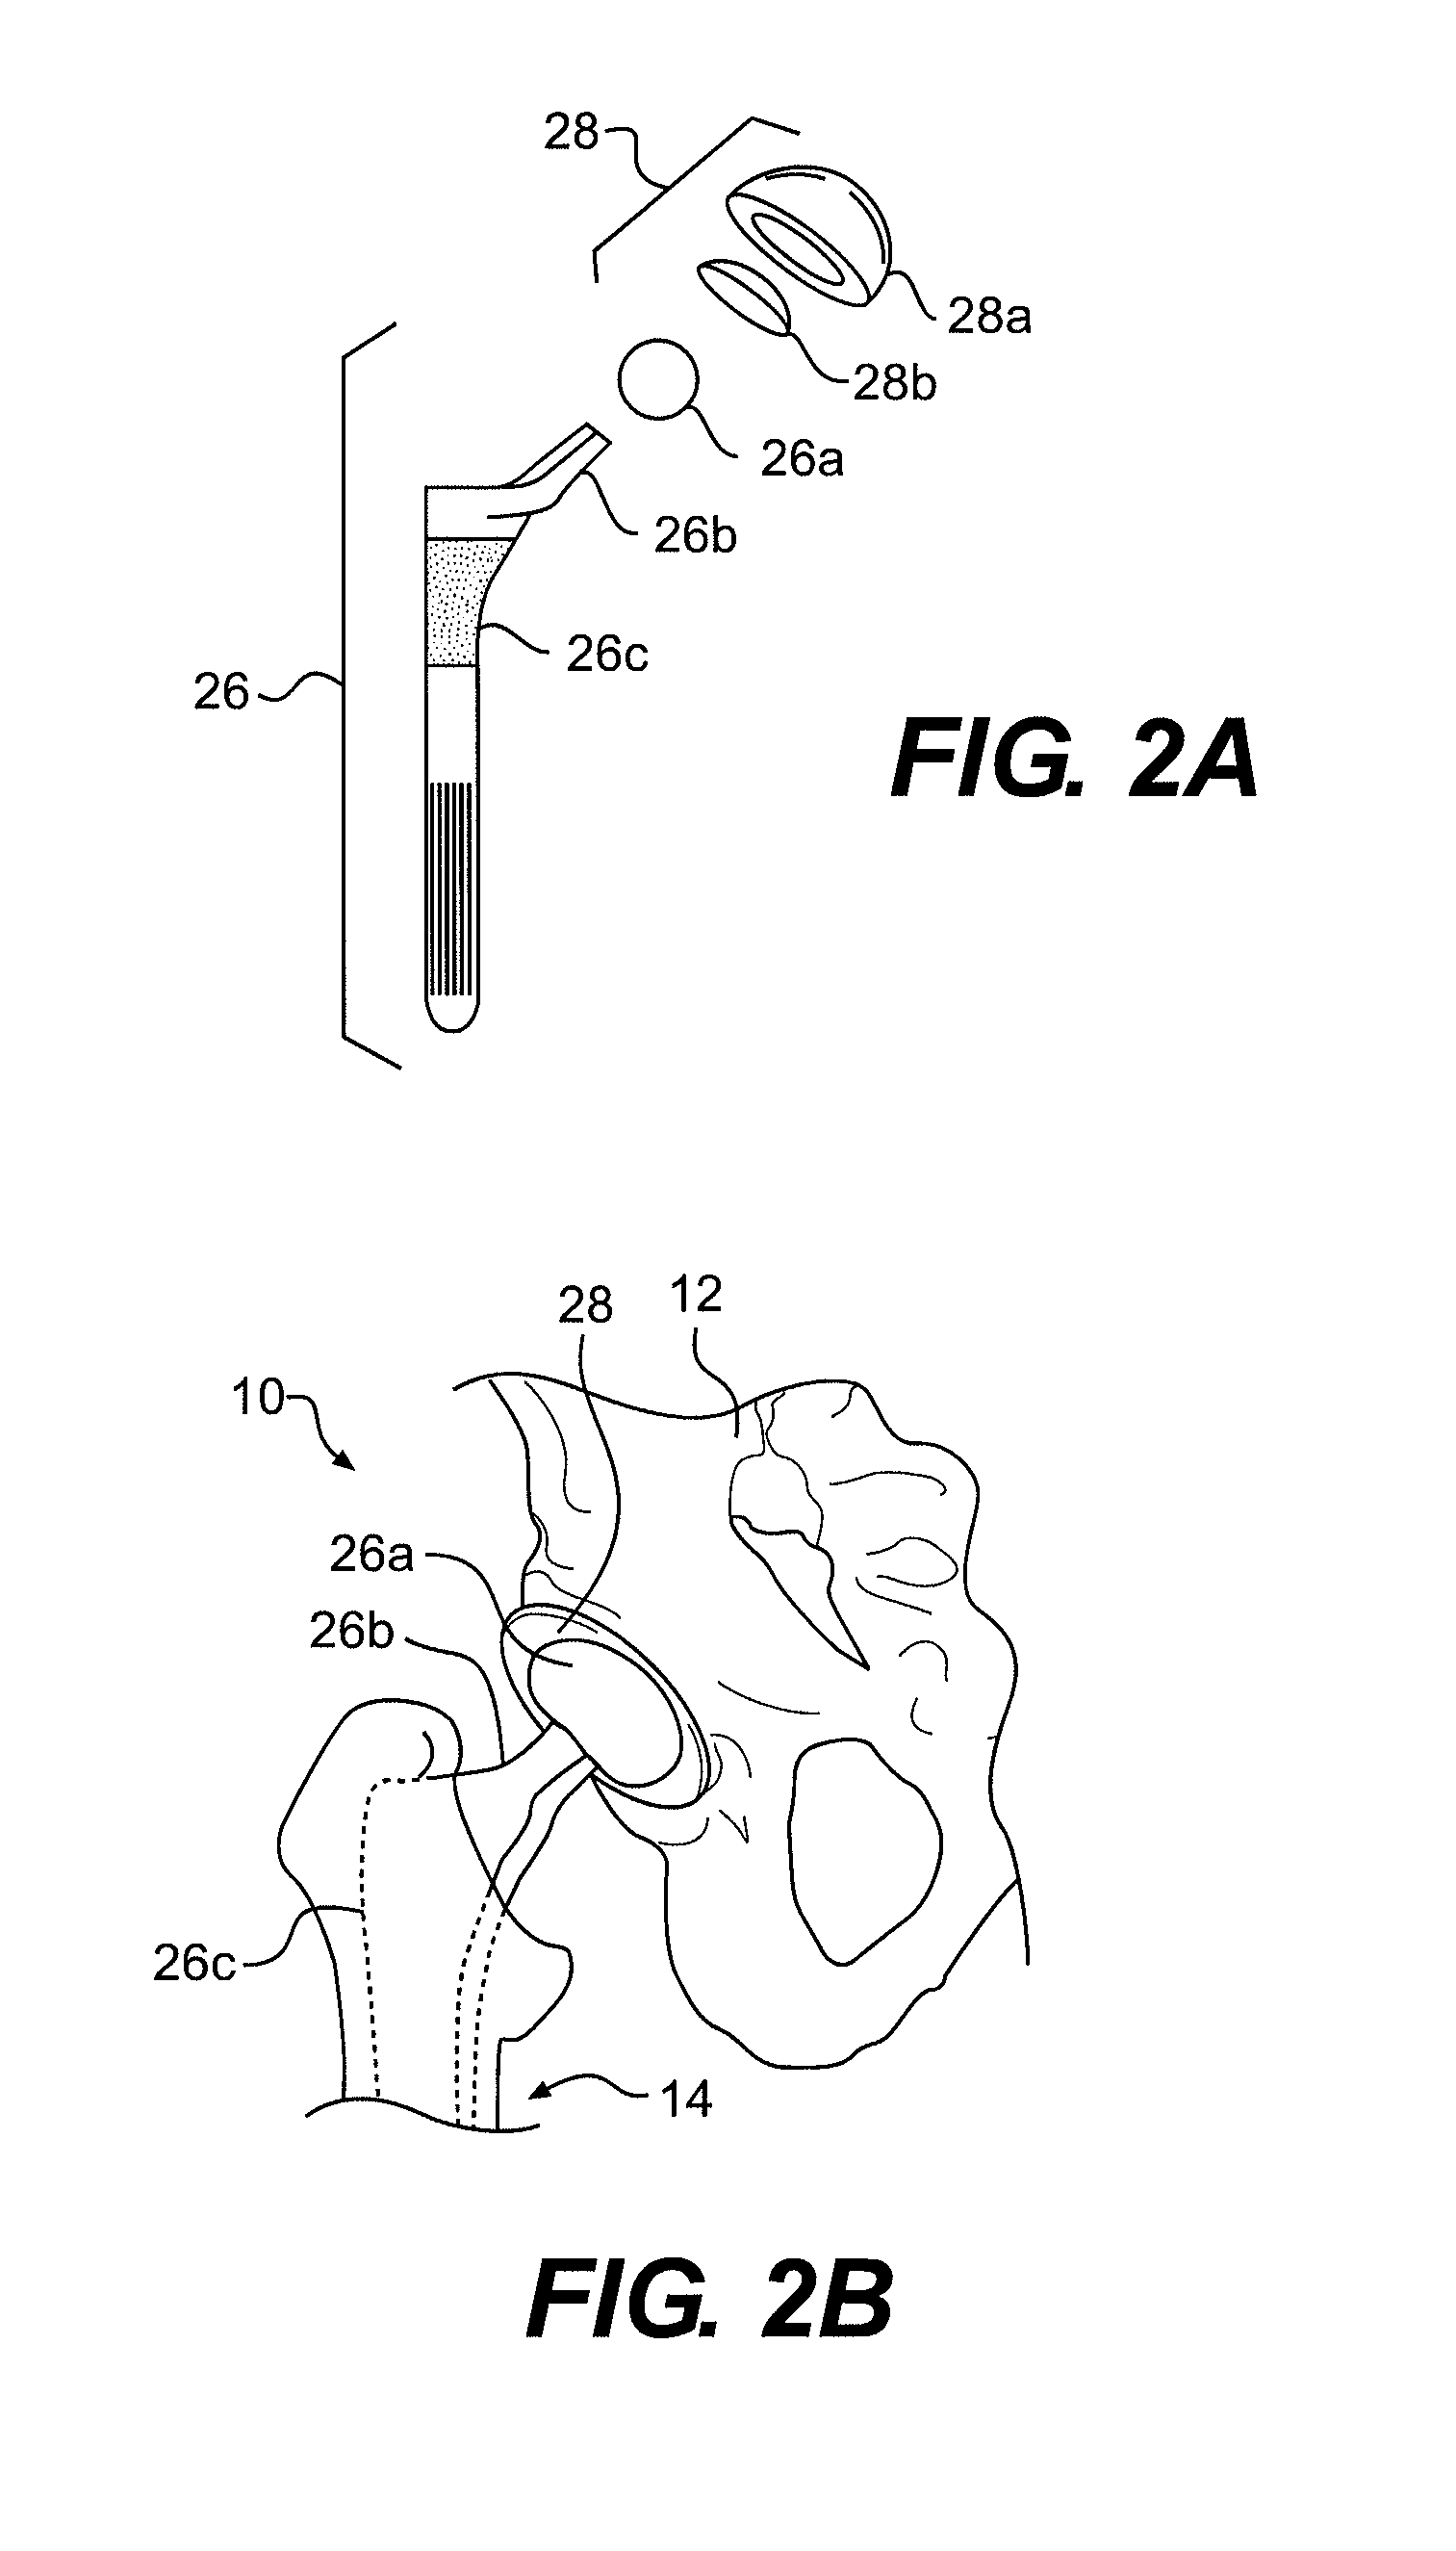 Systems and methods for measuring parameters in joint replacement surgery